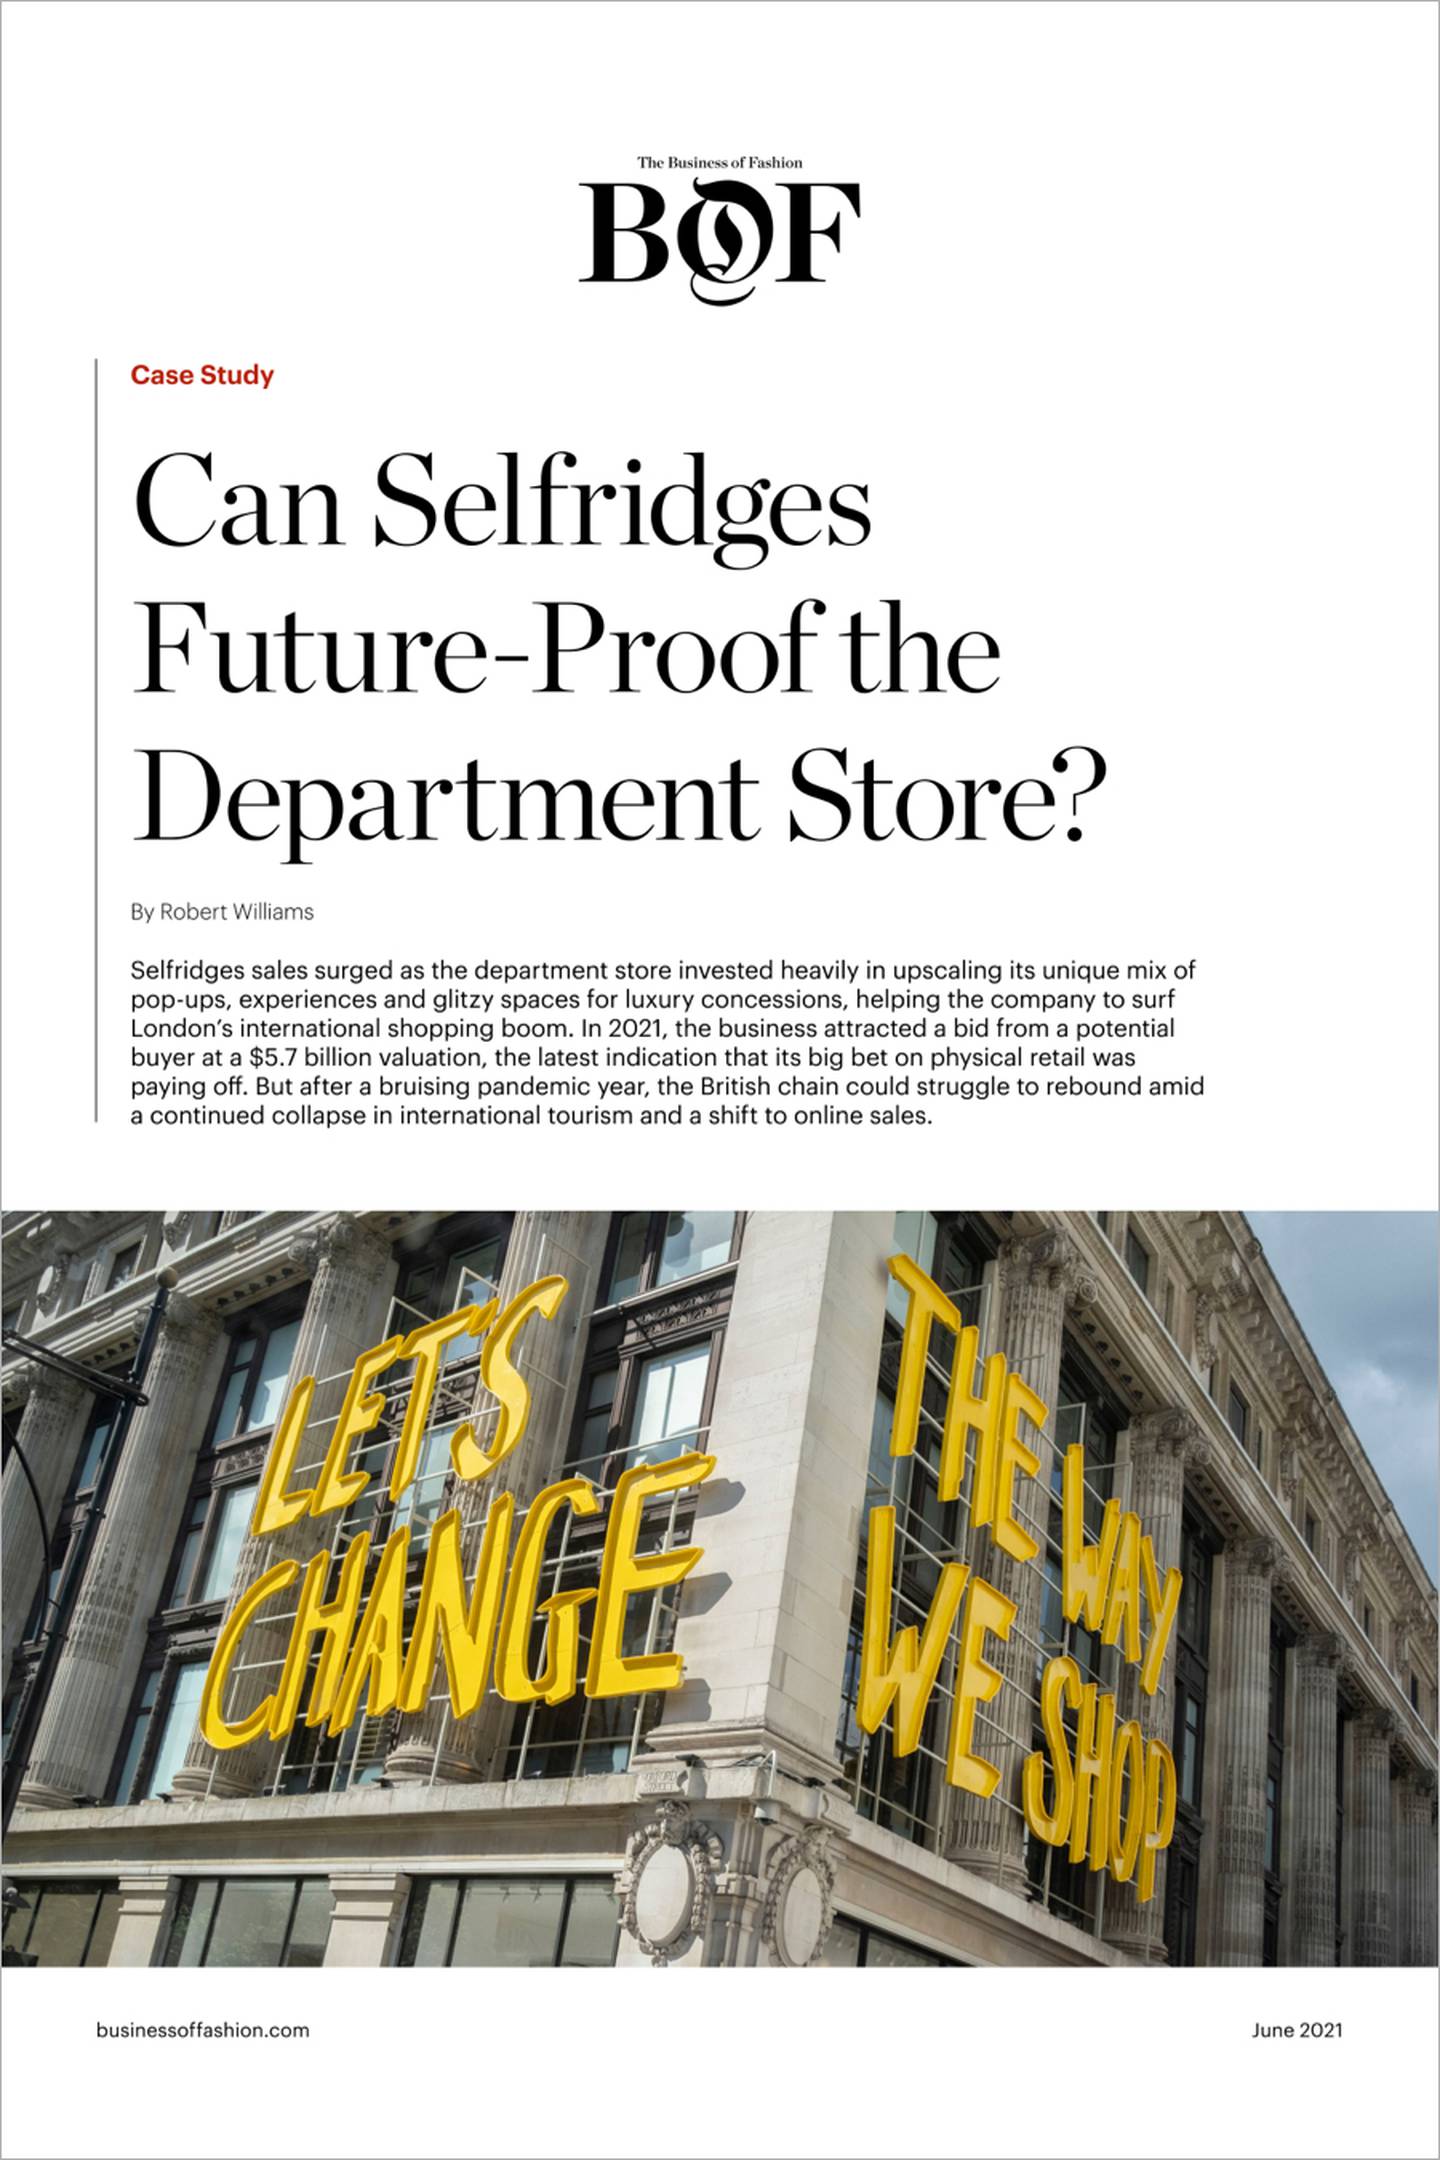 BoF's latest case study explores the strategy that helped Selfridges carve out a position of strength before the pandemic, as well as the challenges
the department store currently faces to adapt its model to a radically changed fashion market.